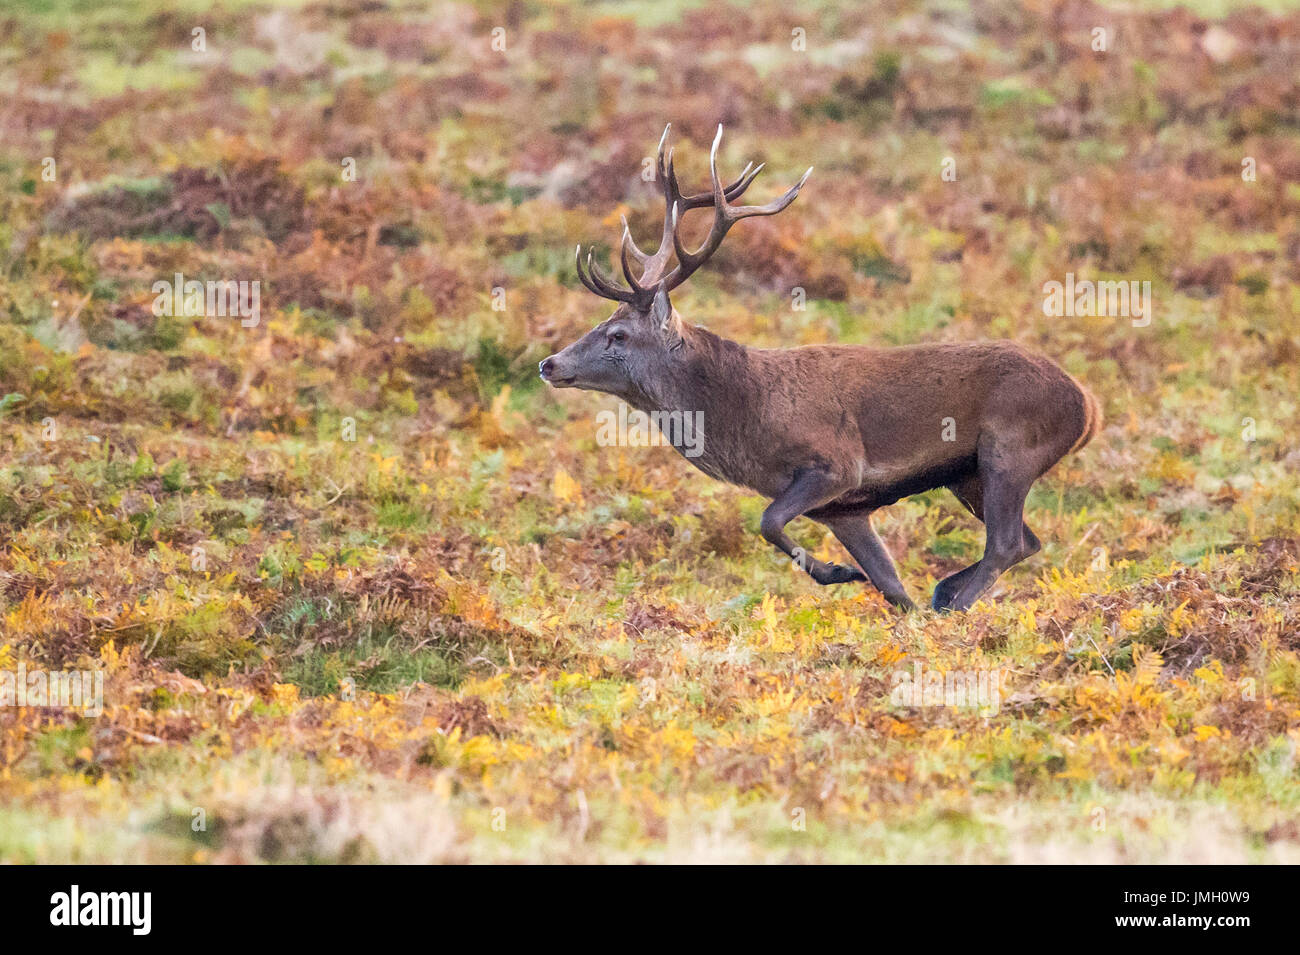 A Red deer stag during the rutting season Stock Photo